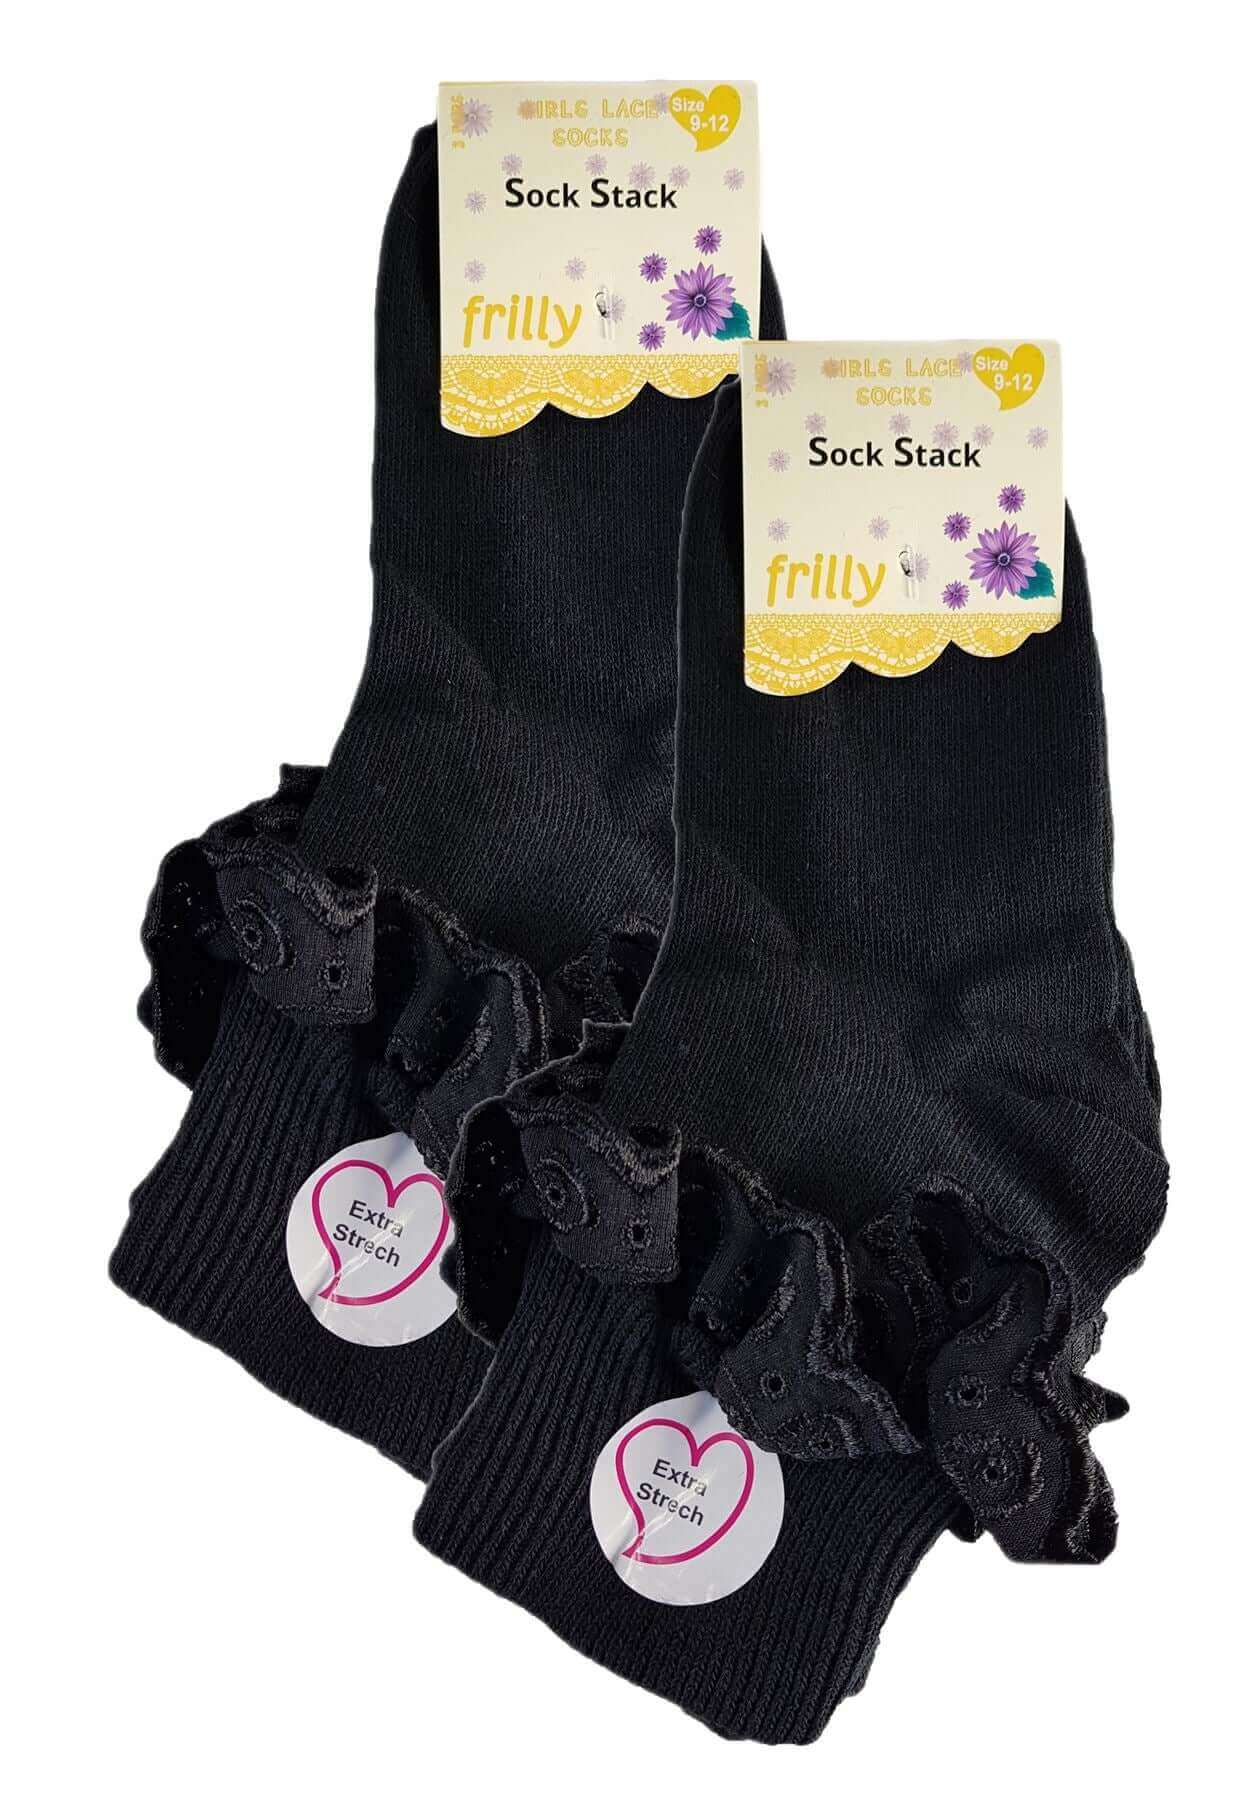 6 Pairs Of Lace Socks Cotton Rich Frilly Ankle For Girls Children. Buy now for £7.00. A Socks by Sock Stack. 12-3, 4-6, 6-8, 9-12, black, childrens, cotton, frilly, girls, grey, kids, lace, navy, socks, white.